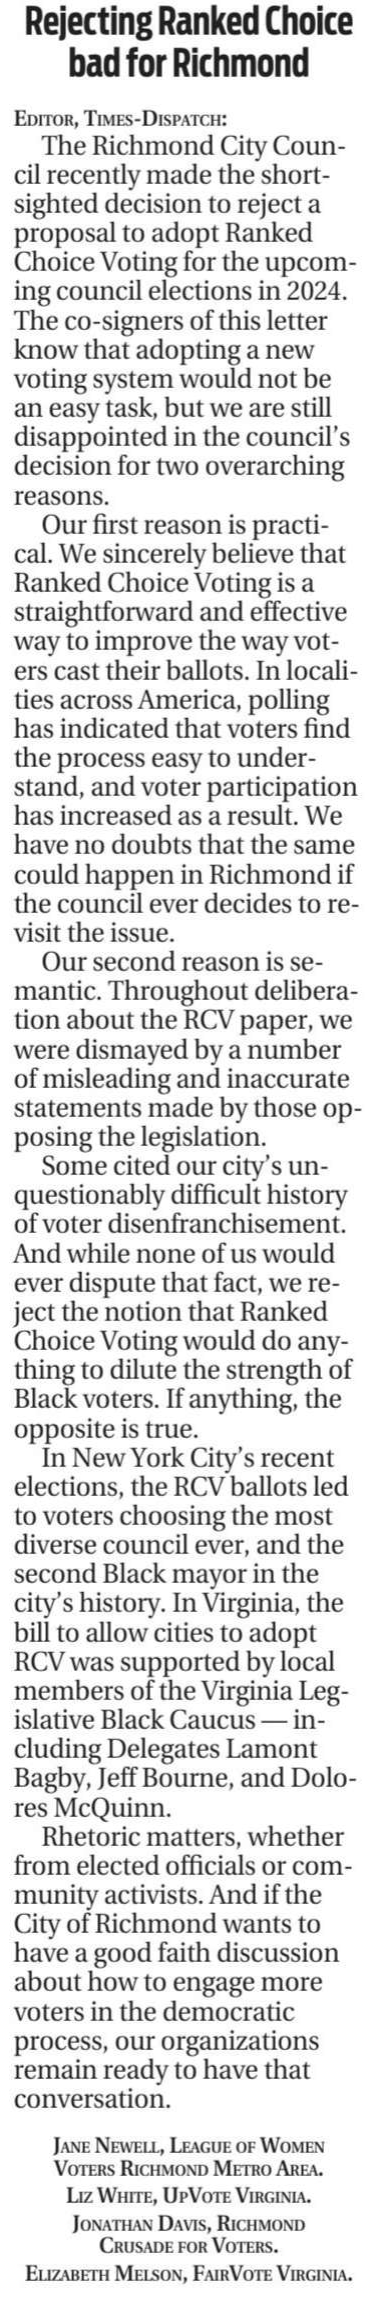 Full letter to the editor image